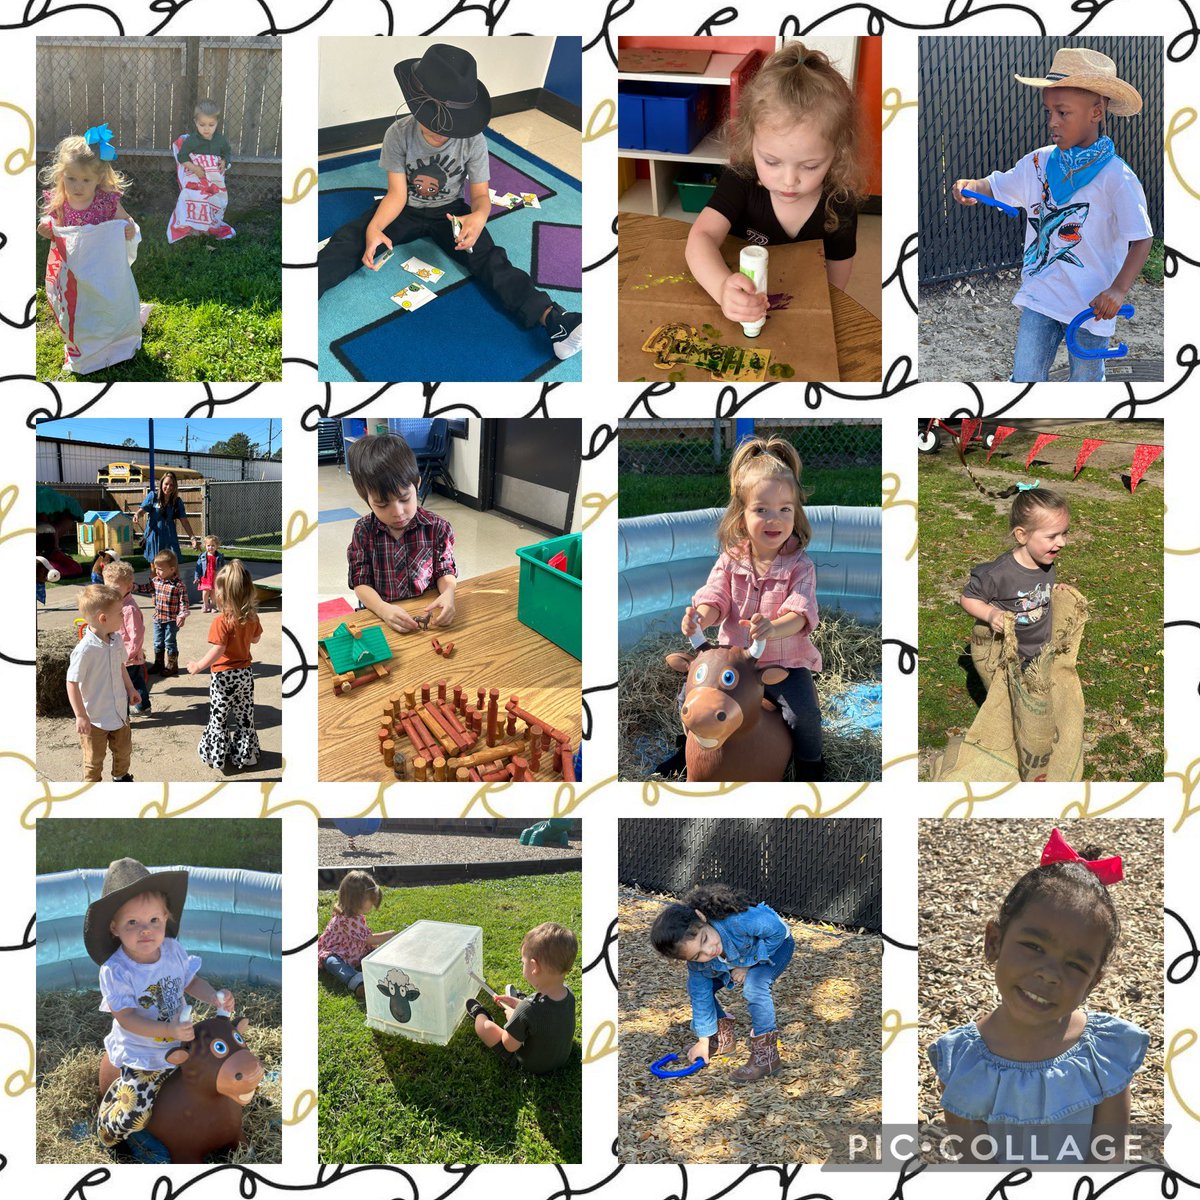 Our little cowpokes took Pre-School by the horns. From pie eating contest, to roping, to milking cows, to bucking broncos we saddled up for some fun,Texas style. #ELC2 #ReadySetRodeo #RodeoVibes #GoTexanDay @CFISDELCS